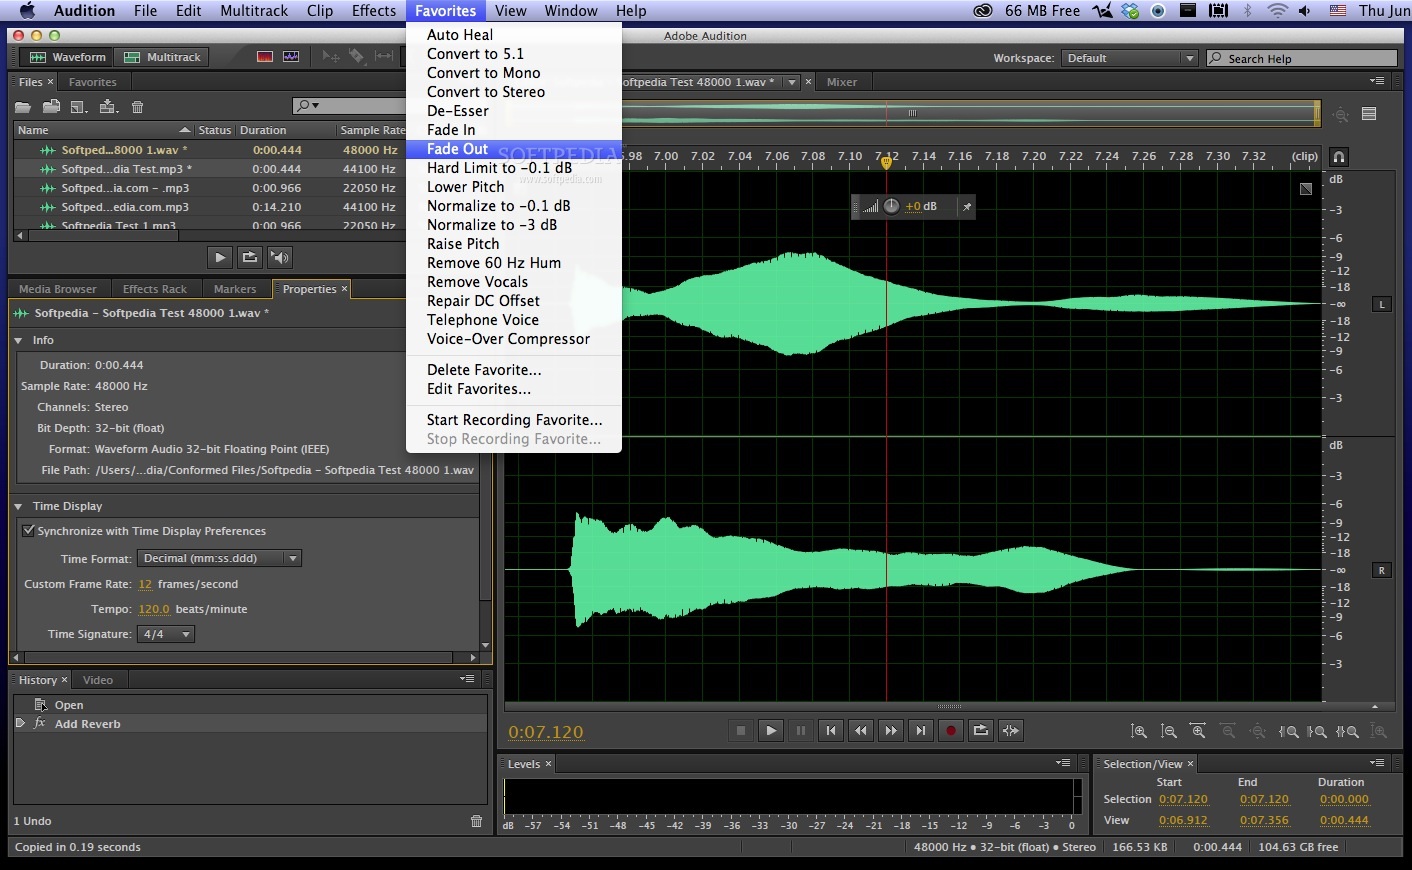 Download free adobe audition 3.0